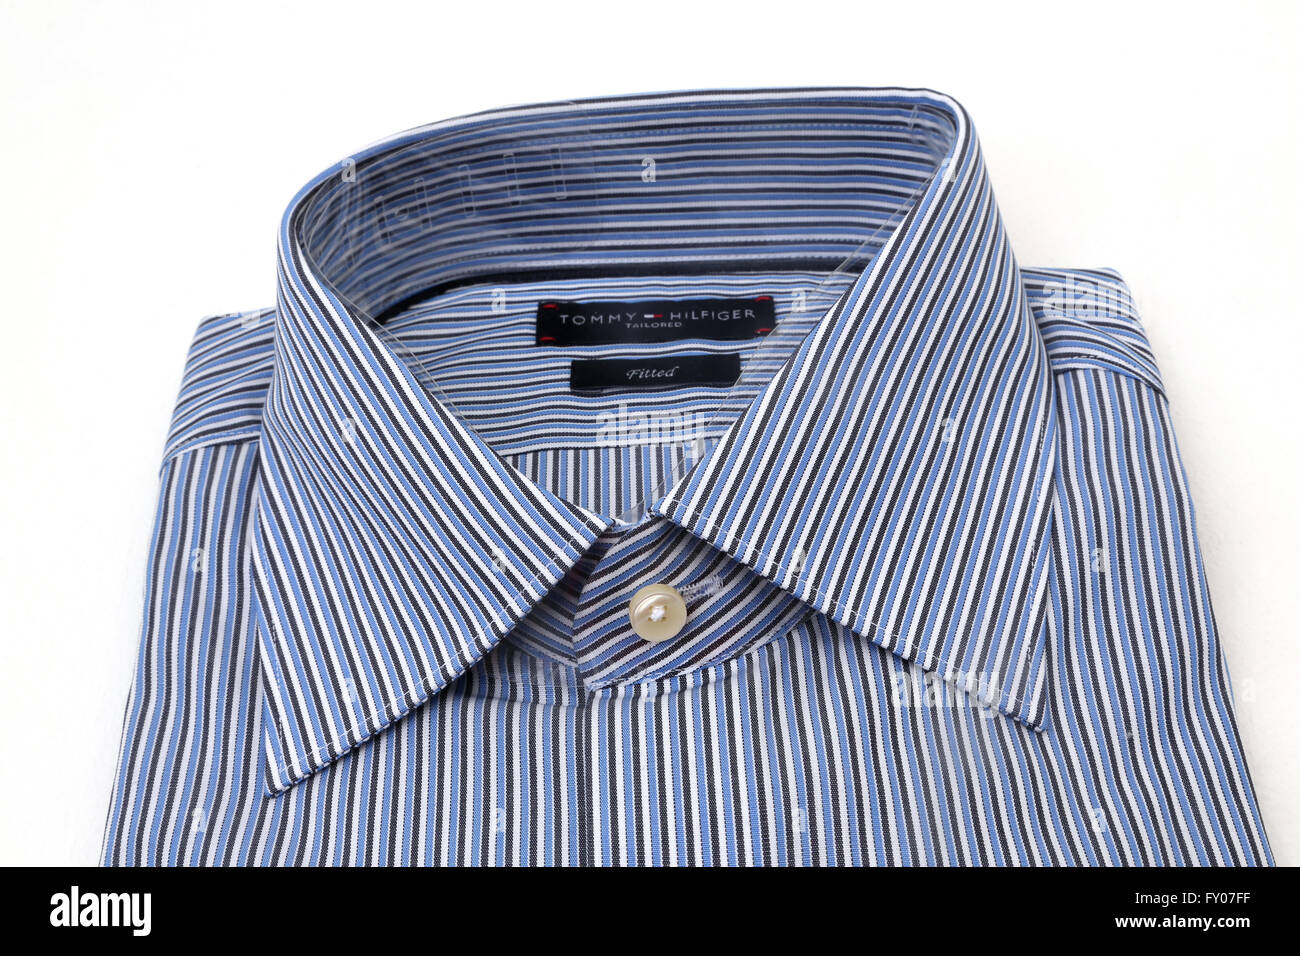 Tommy Hilfiger Tailored Fitted Blue Striped Shirt Stock Photo - Alamy